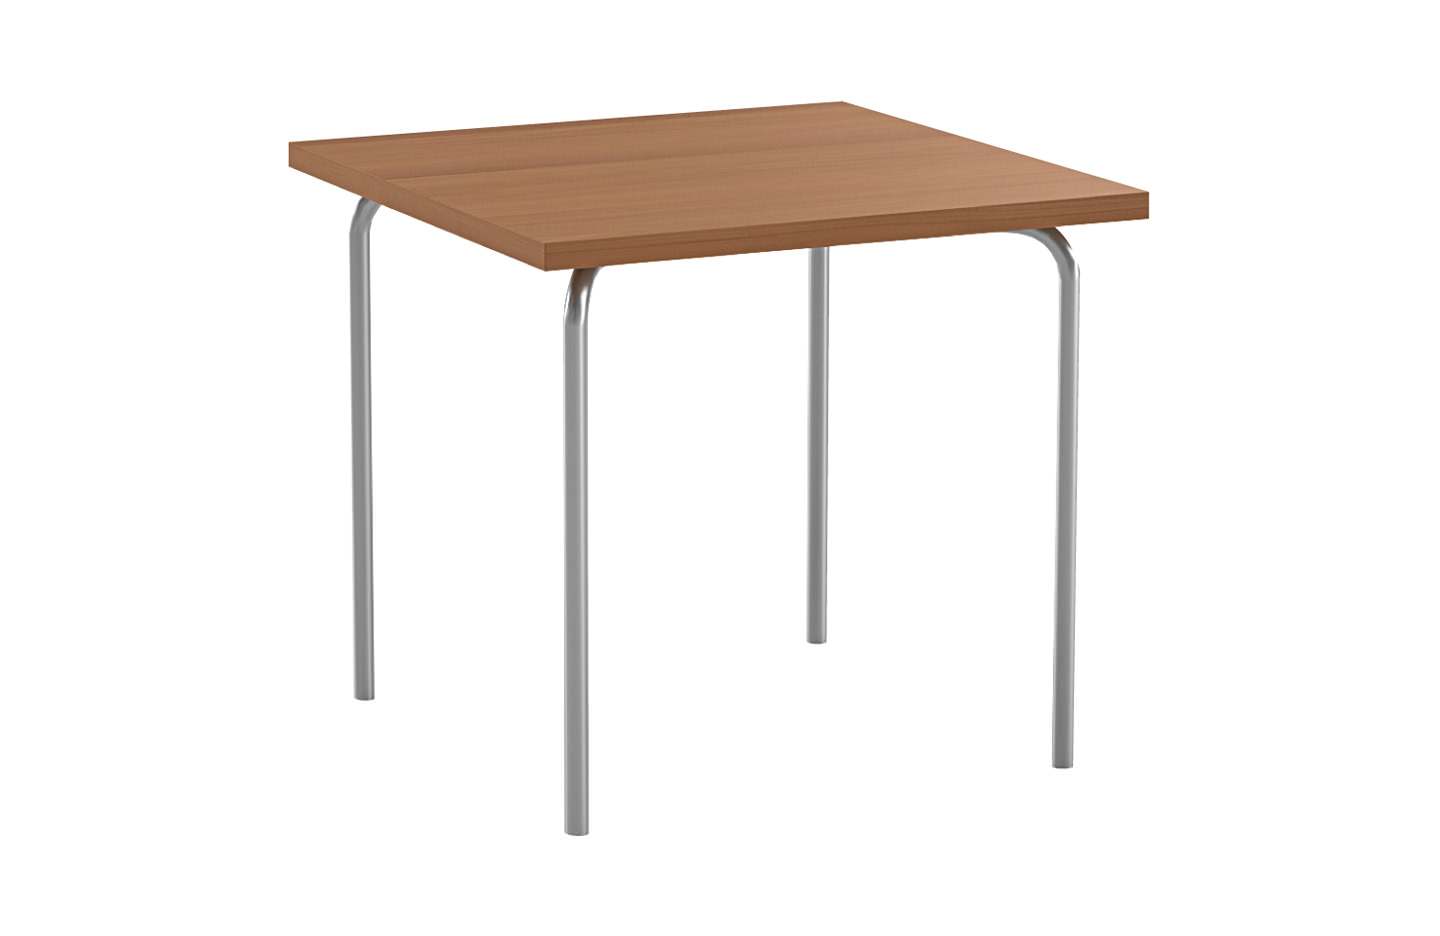 ACTF-242422, ACTF-363622 Accent Jr. Square Activity Tables